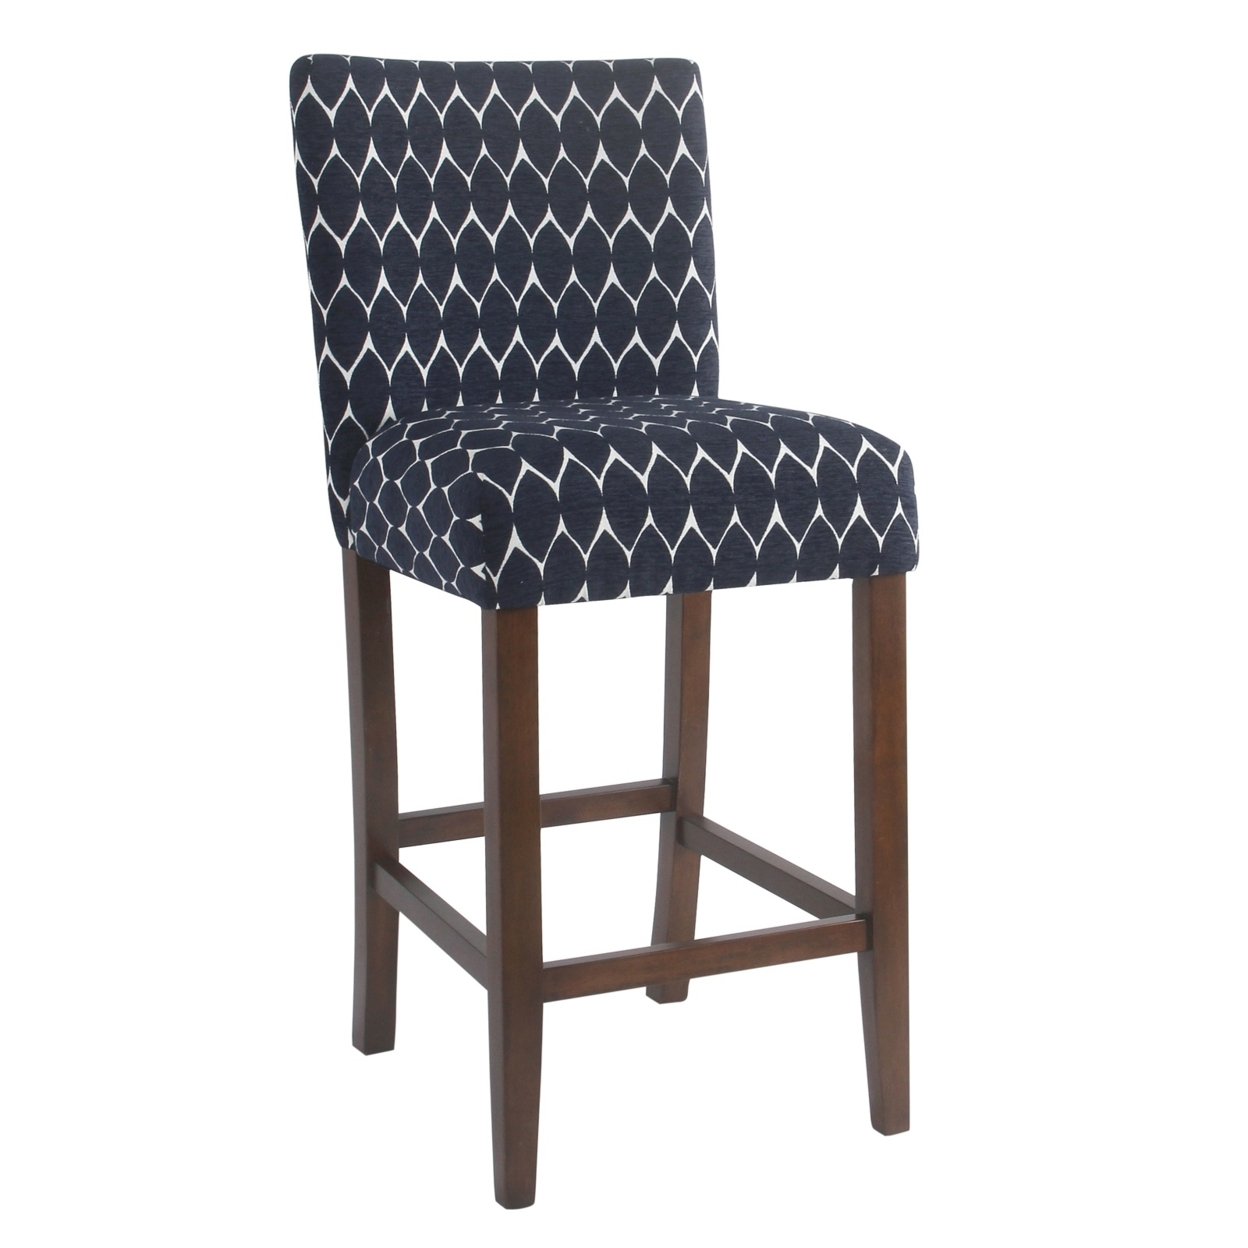 Wooden 29 Inch Counter Height Stool With Geometric Pattern Fabric Upholstery, Blue And White- Saltoro Sherpi